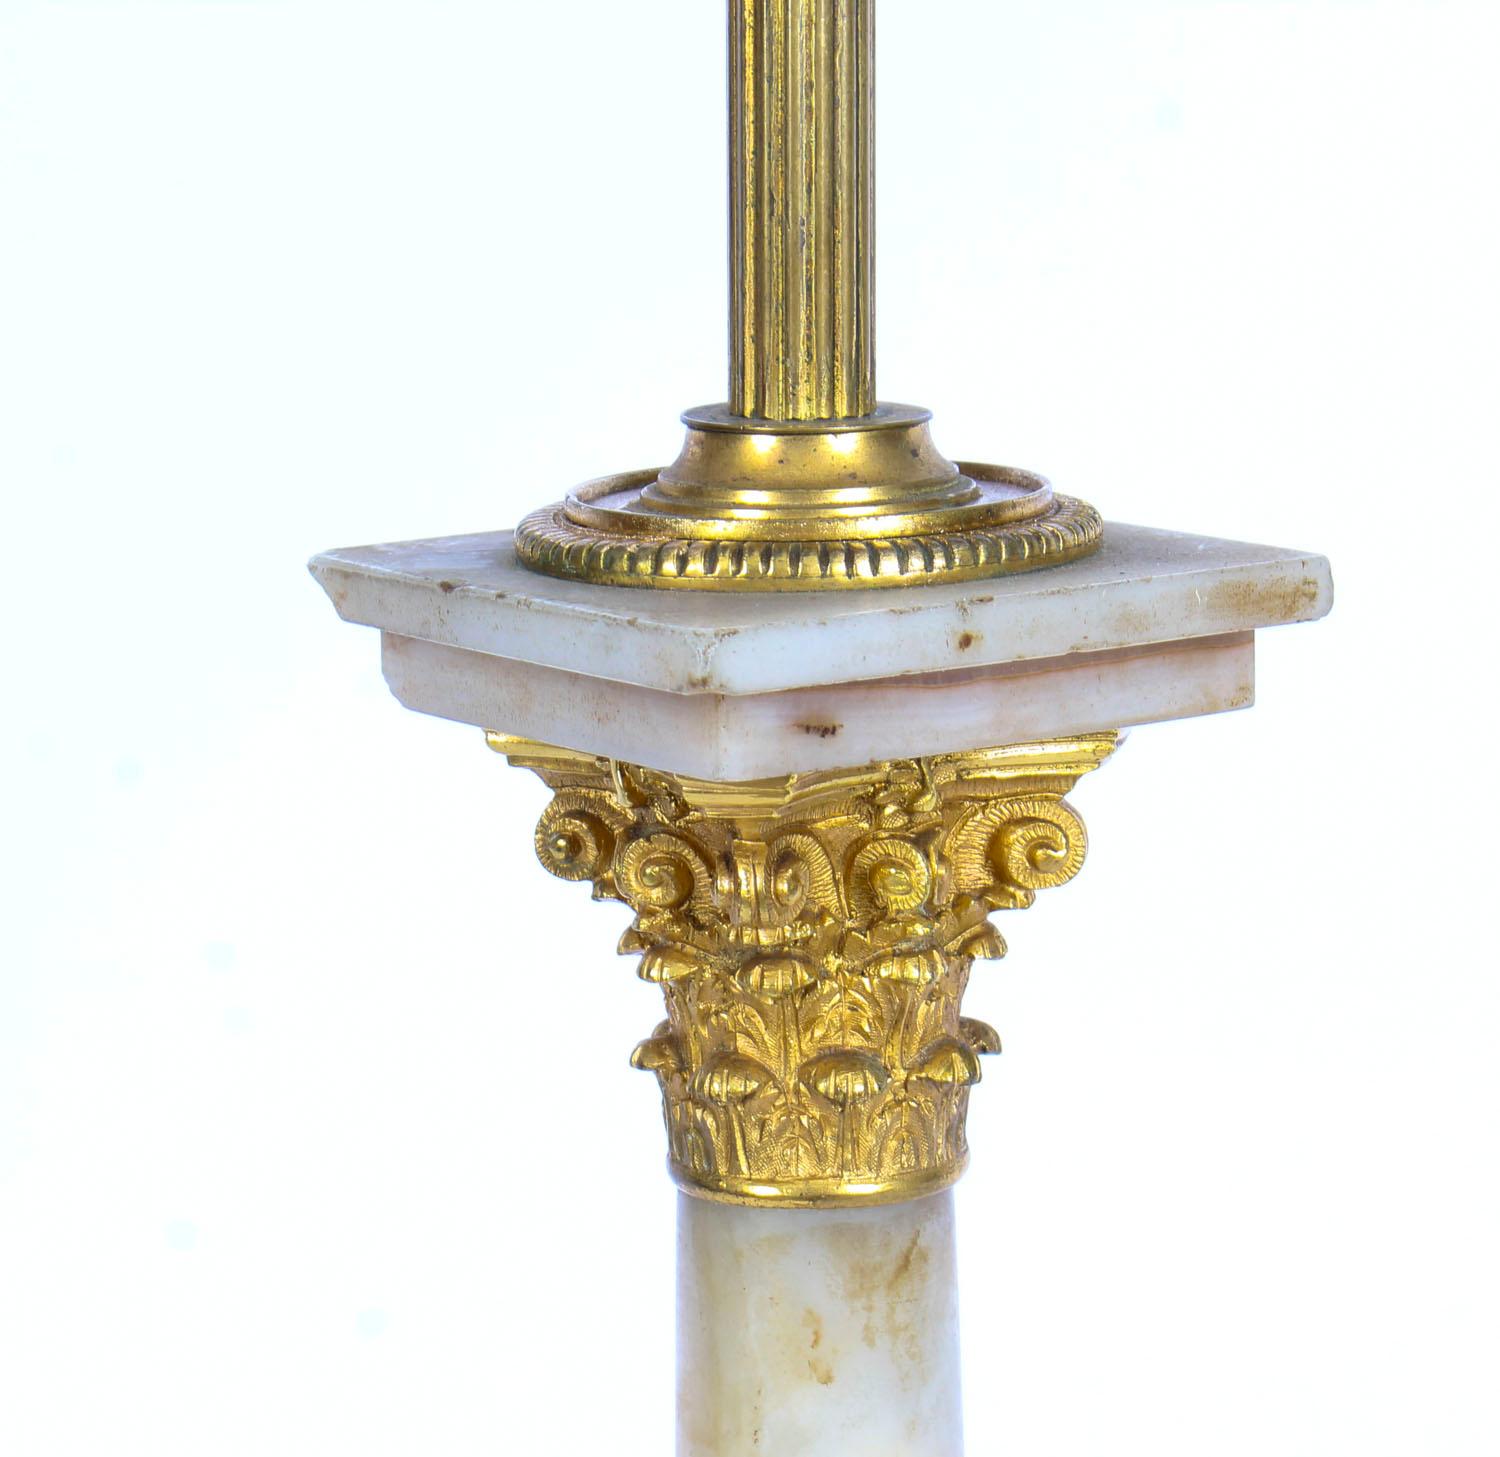 Antique Victorian Ormolu Mounted Onyx Corinthian Column Table Lamp 19th Century In Good Condition For Sale In London, GB